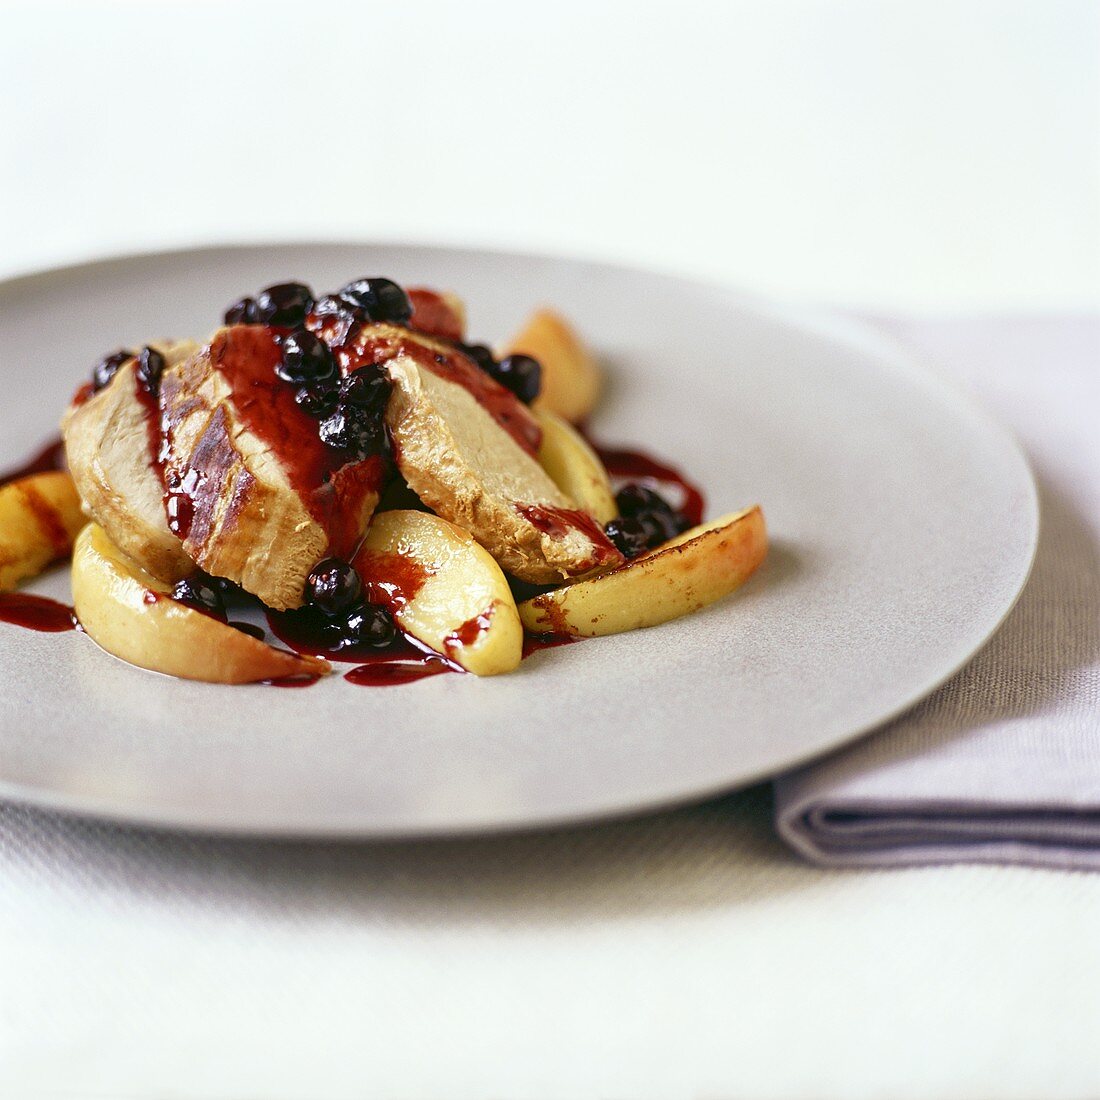 Pork fillet with blackcurrants and apples